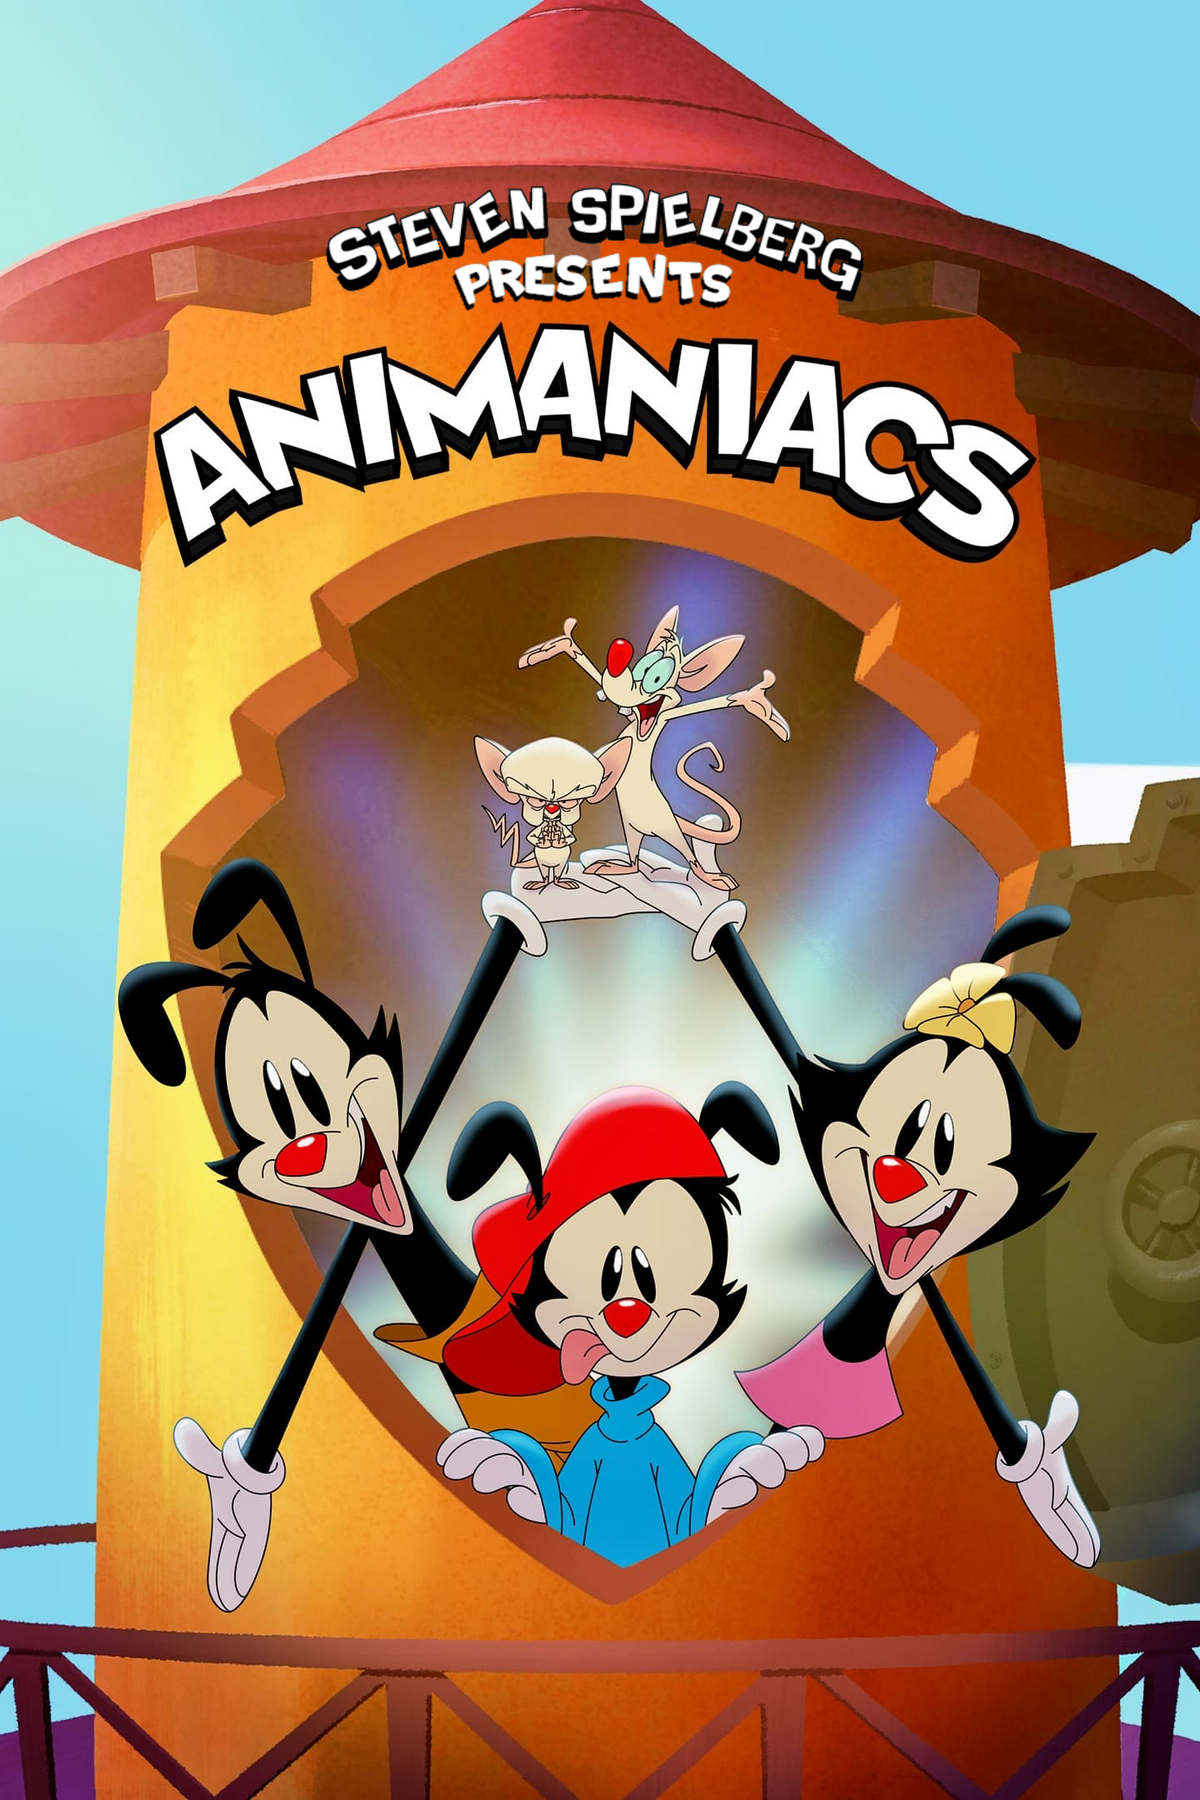 Juan Pablo on X: Inspired by the concept art of the Animaniacs